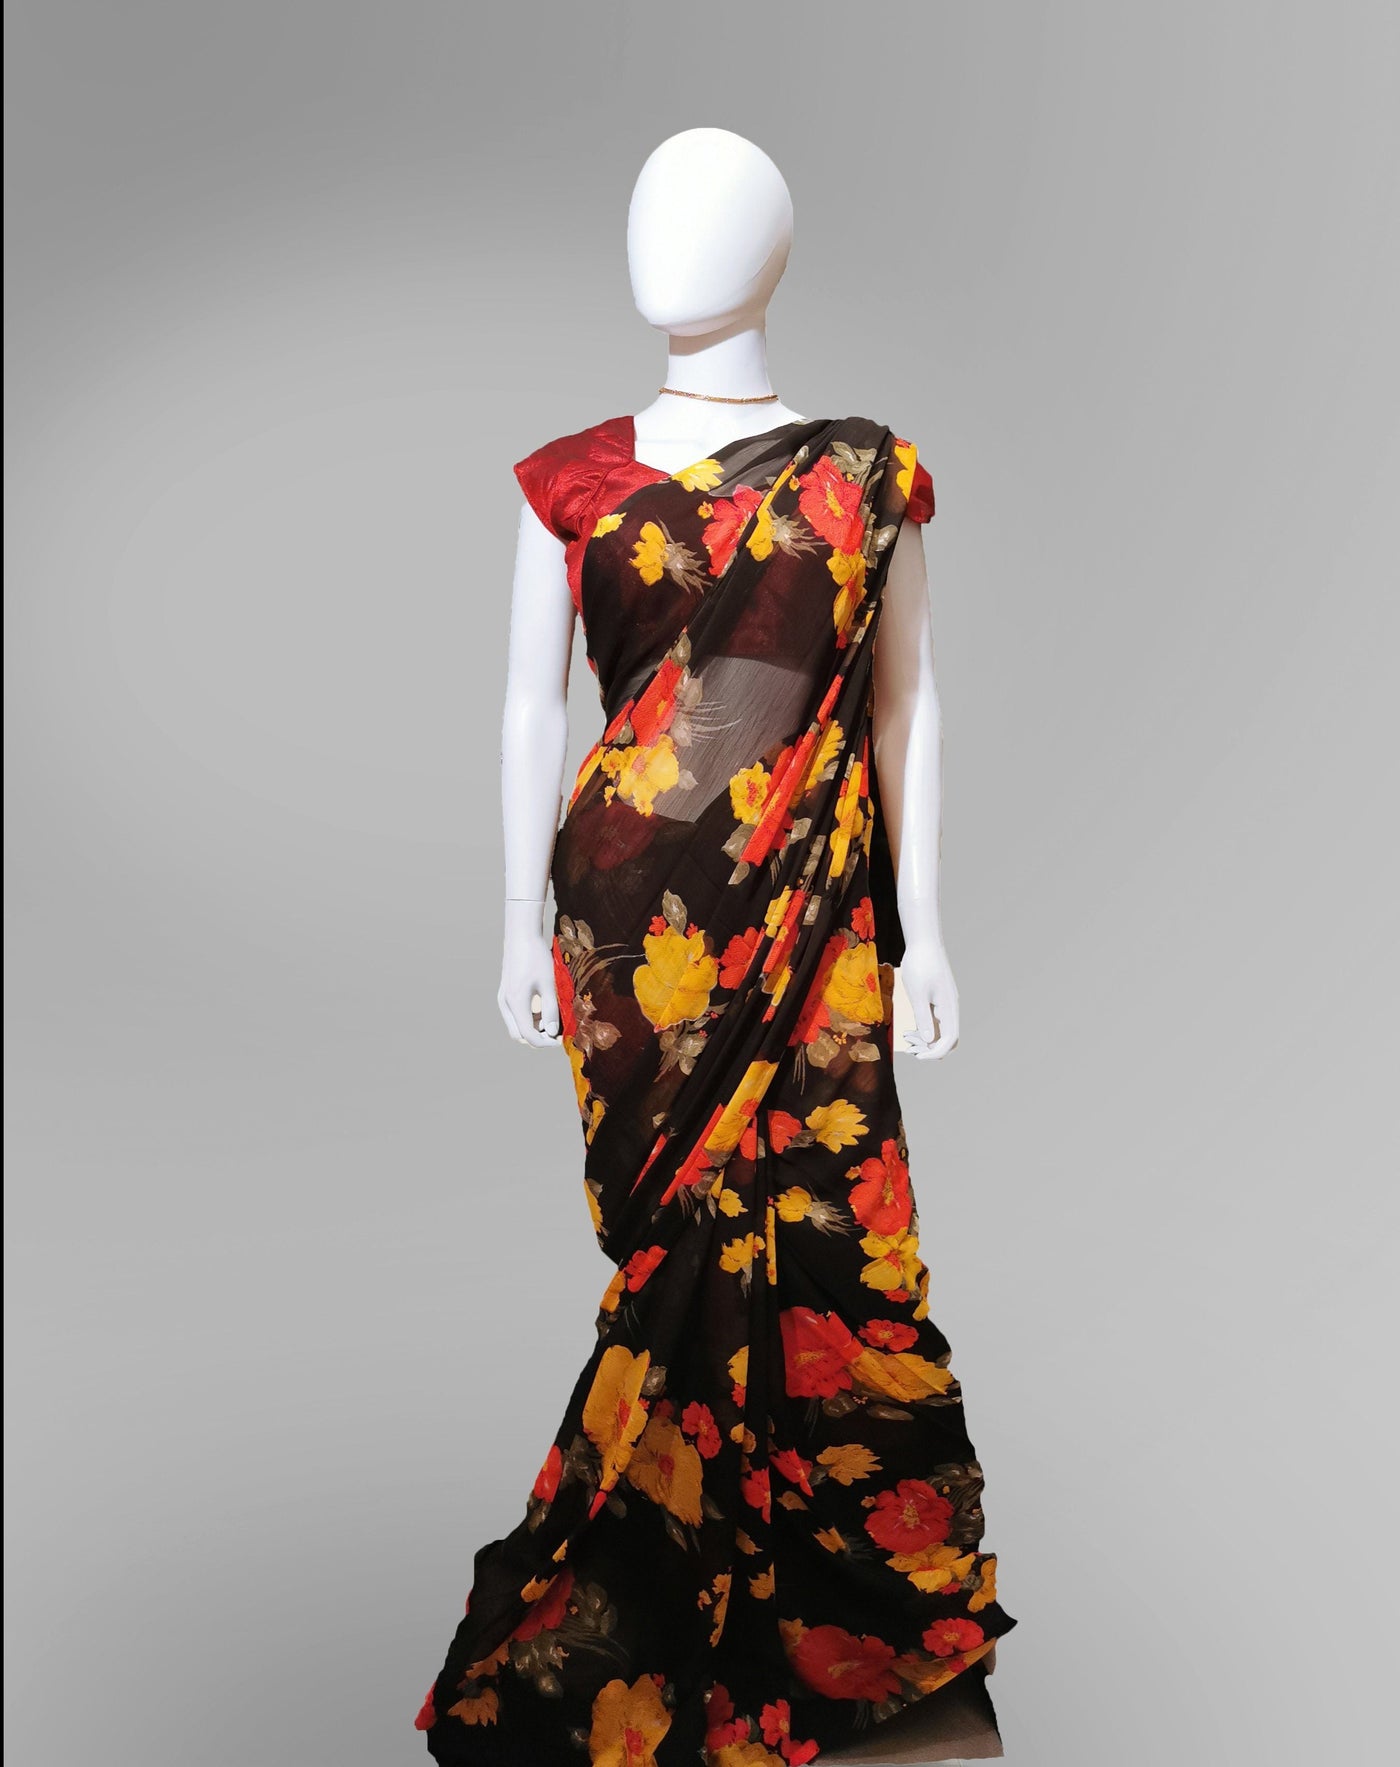 Saree in Black with Autumn Floral Print Indian Clothing in Denver, CO, Aurora, CO, Boulder, CO, Fort Collins, CO, Colorado Springs, CO, Parker, CO, Highlands Ranch, CO, Cherry Creek, CO, Centennial, CO, and Longmont, CO. NATIONWIDE SHIPPING USA- India Fashion X